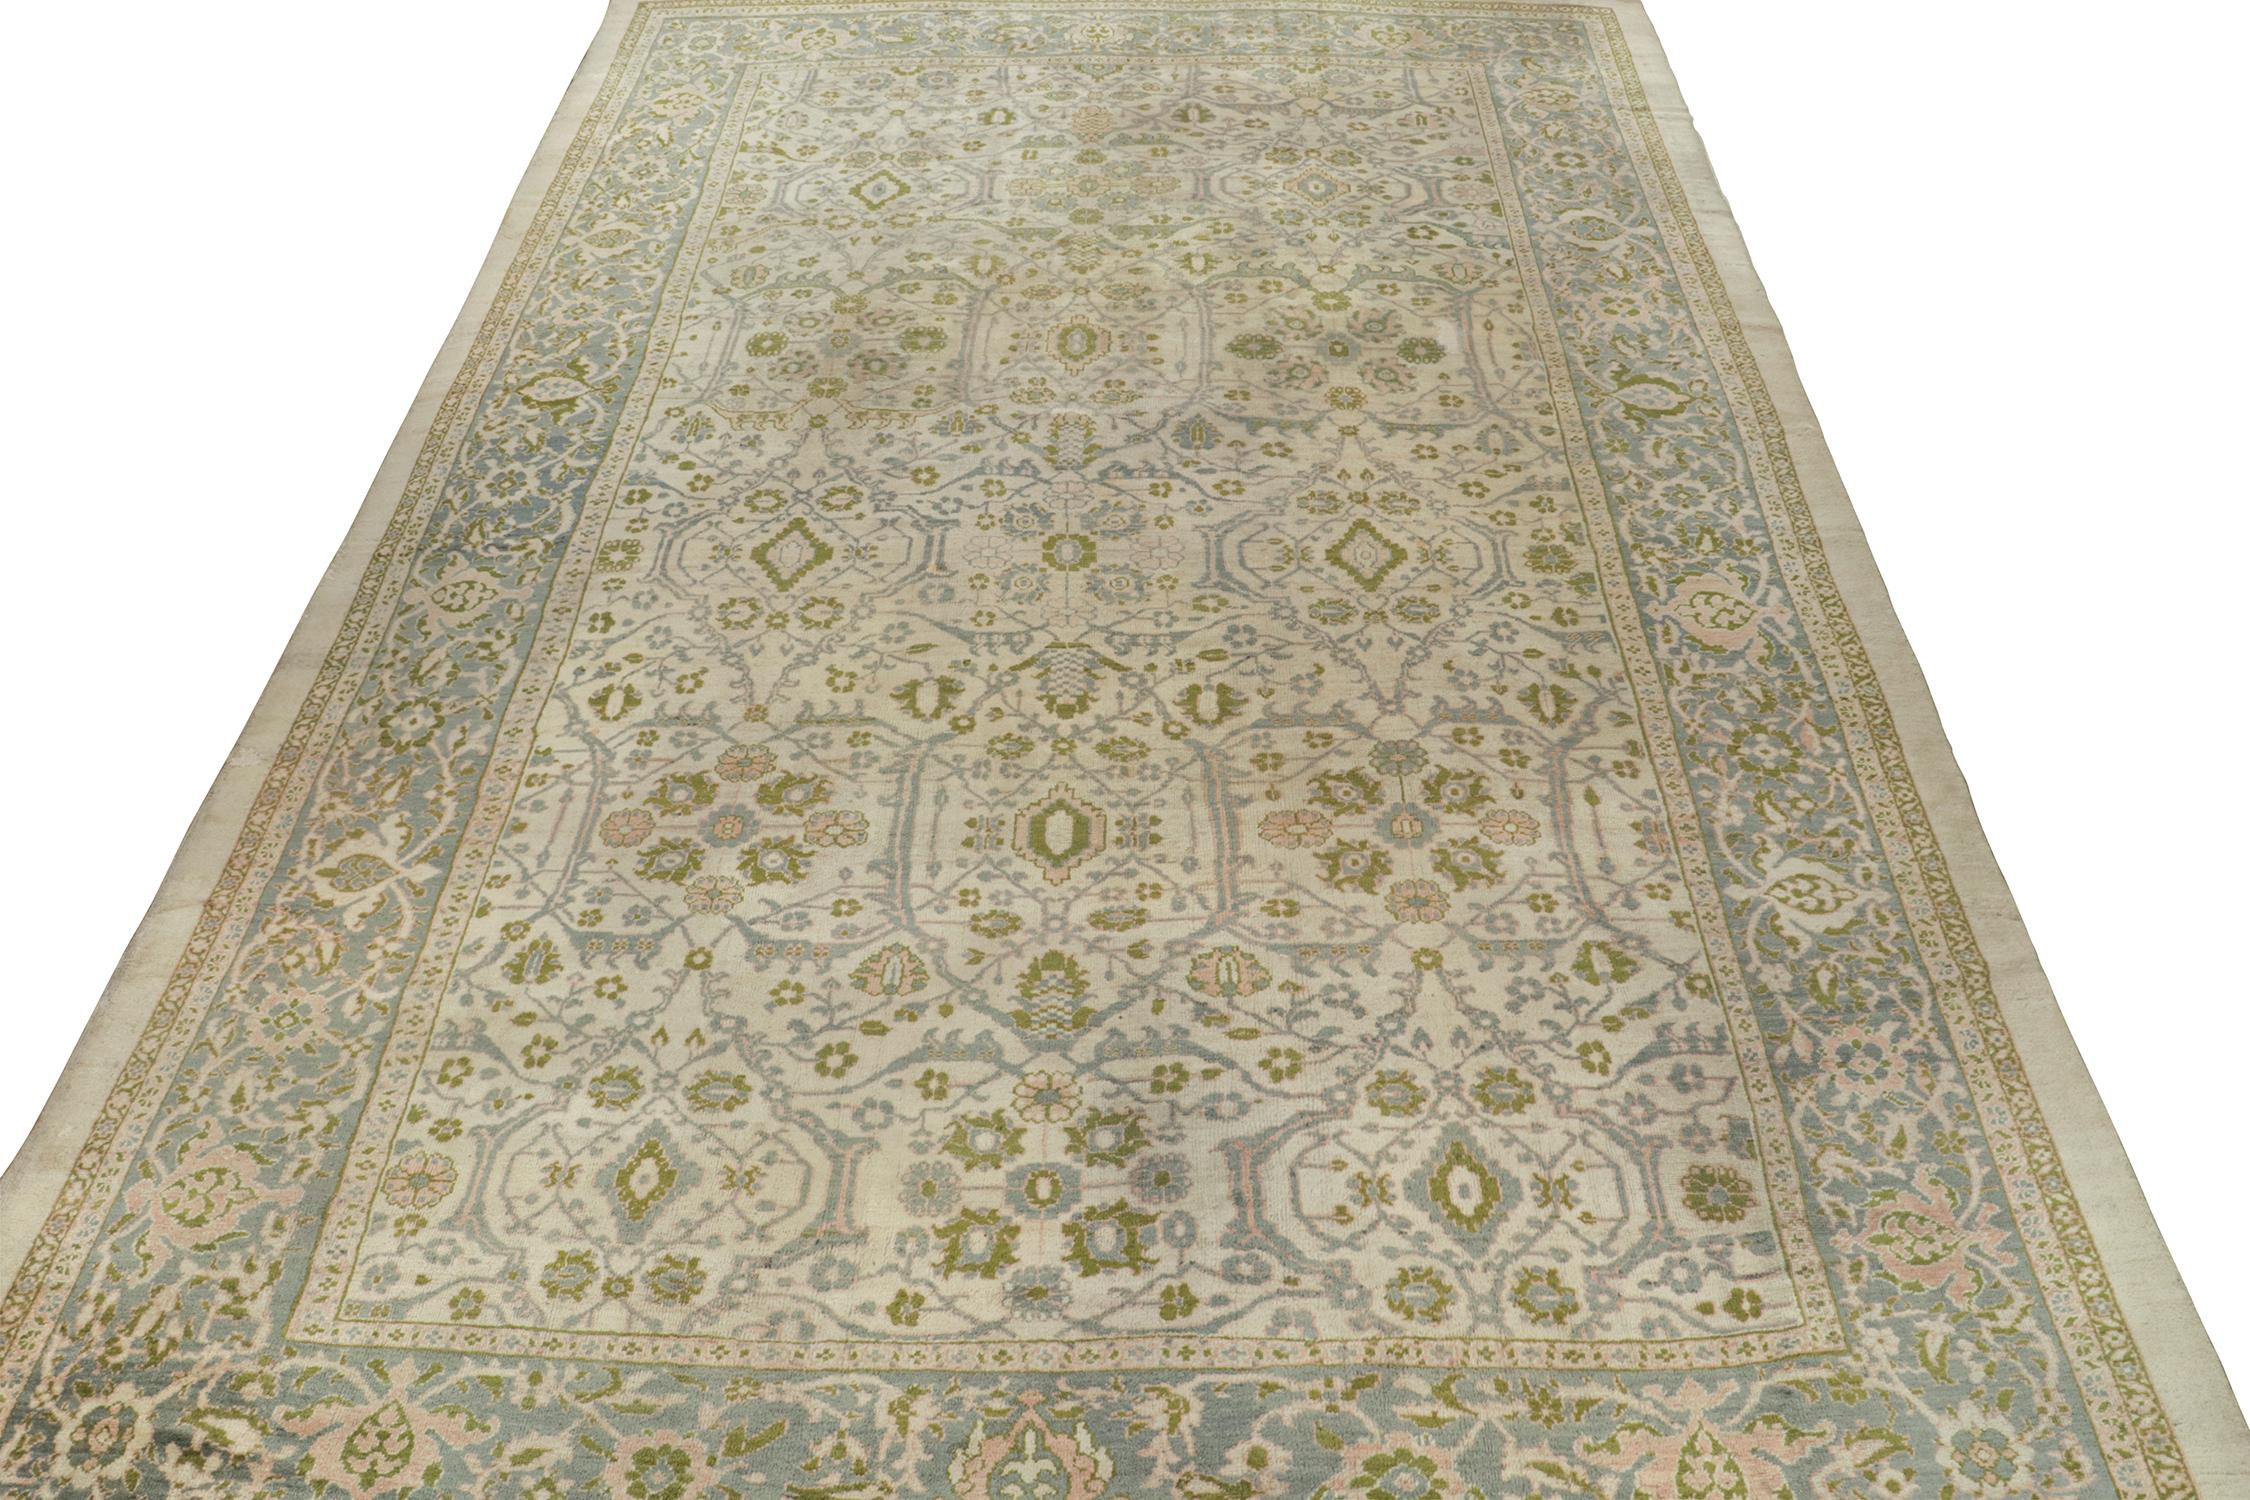 This antique 12x18 Persian Sultanabad rug is an outstanding new addition to Rug & Kilim’s most rare classic curations. Hand-knotted in wool, it originates circa 1880-1890 and prevails in good condition for its age and origin—among many